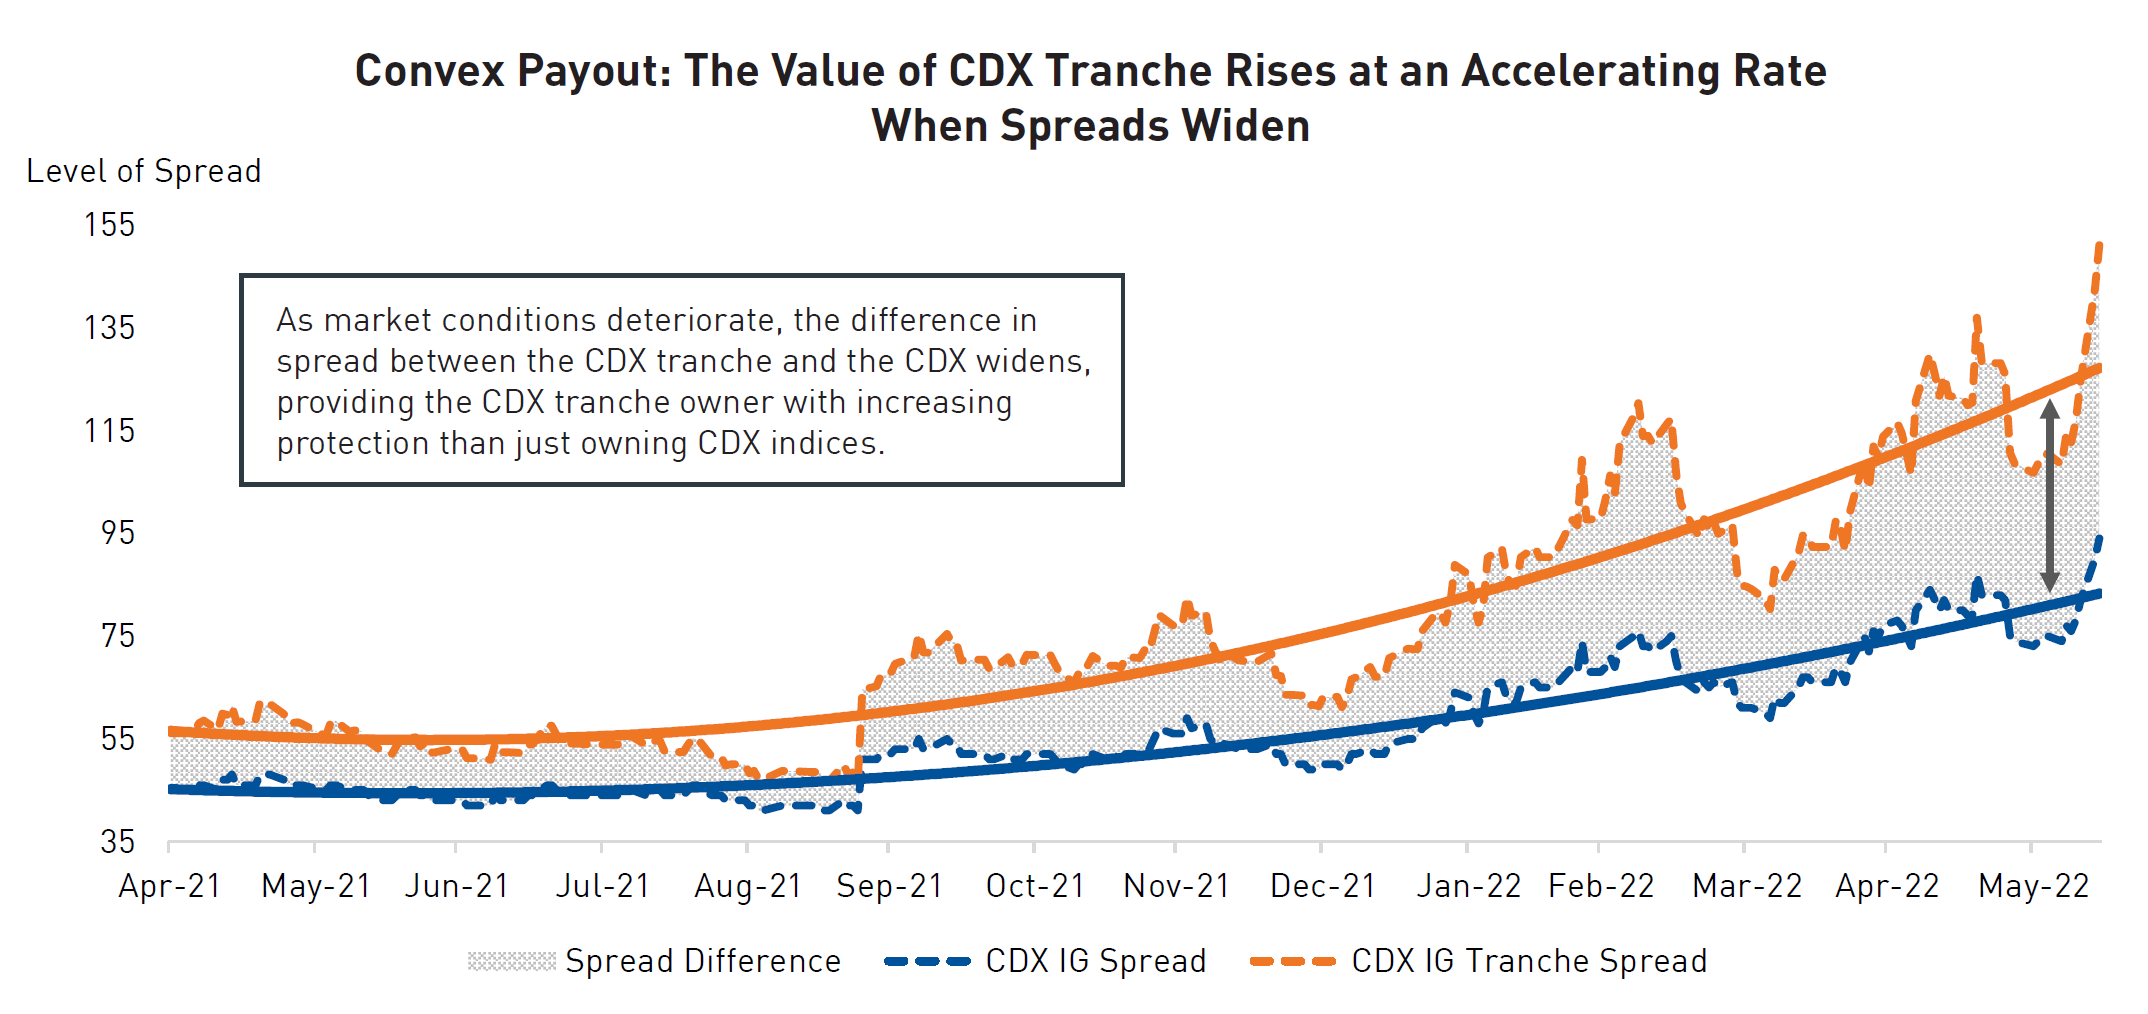 Convex Payout: The Value of CDX Tranche Rises at an Accelerating Rate When Spreads Widen